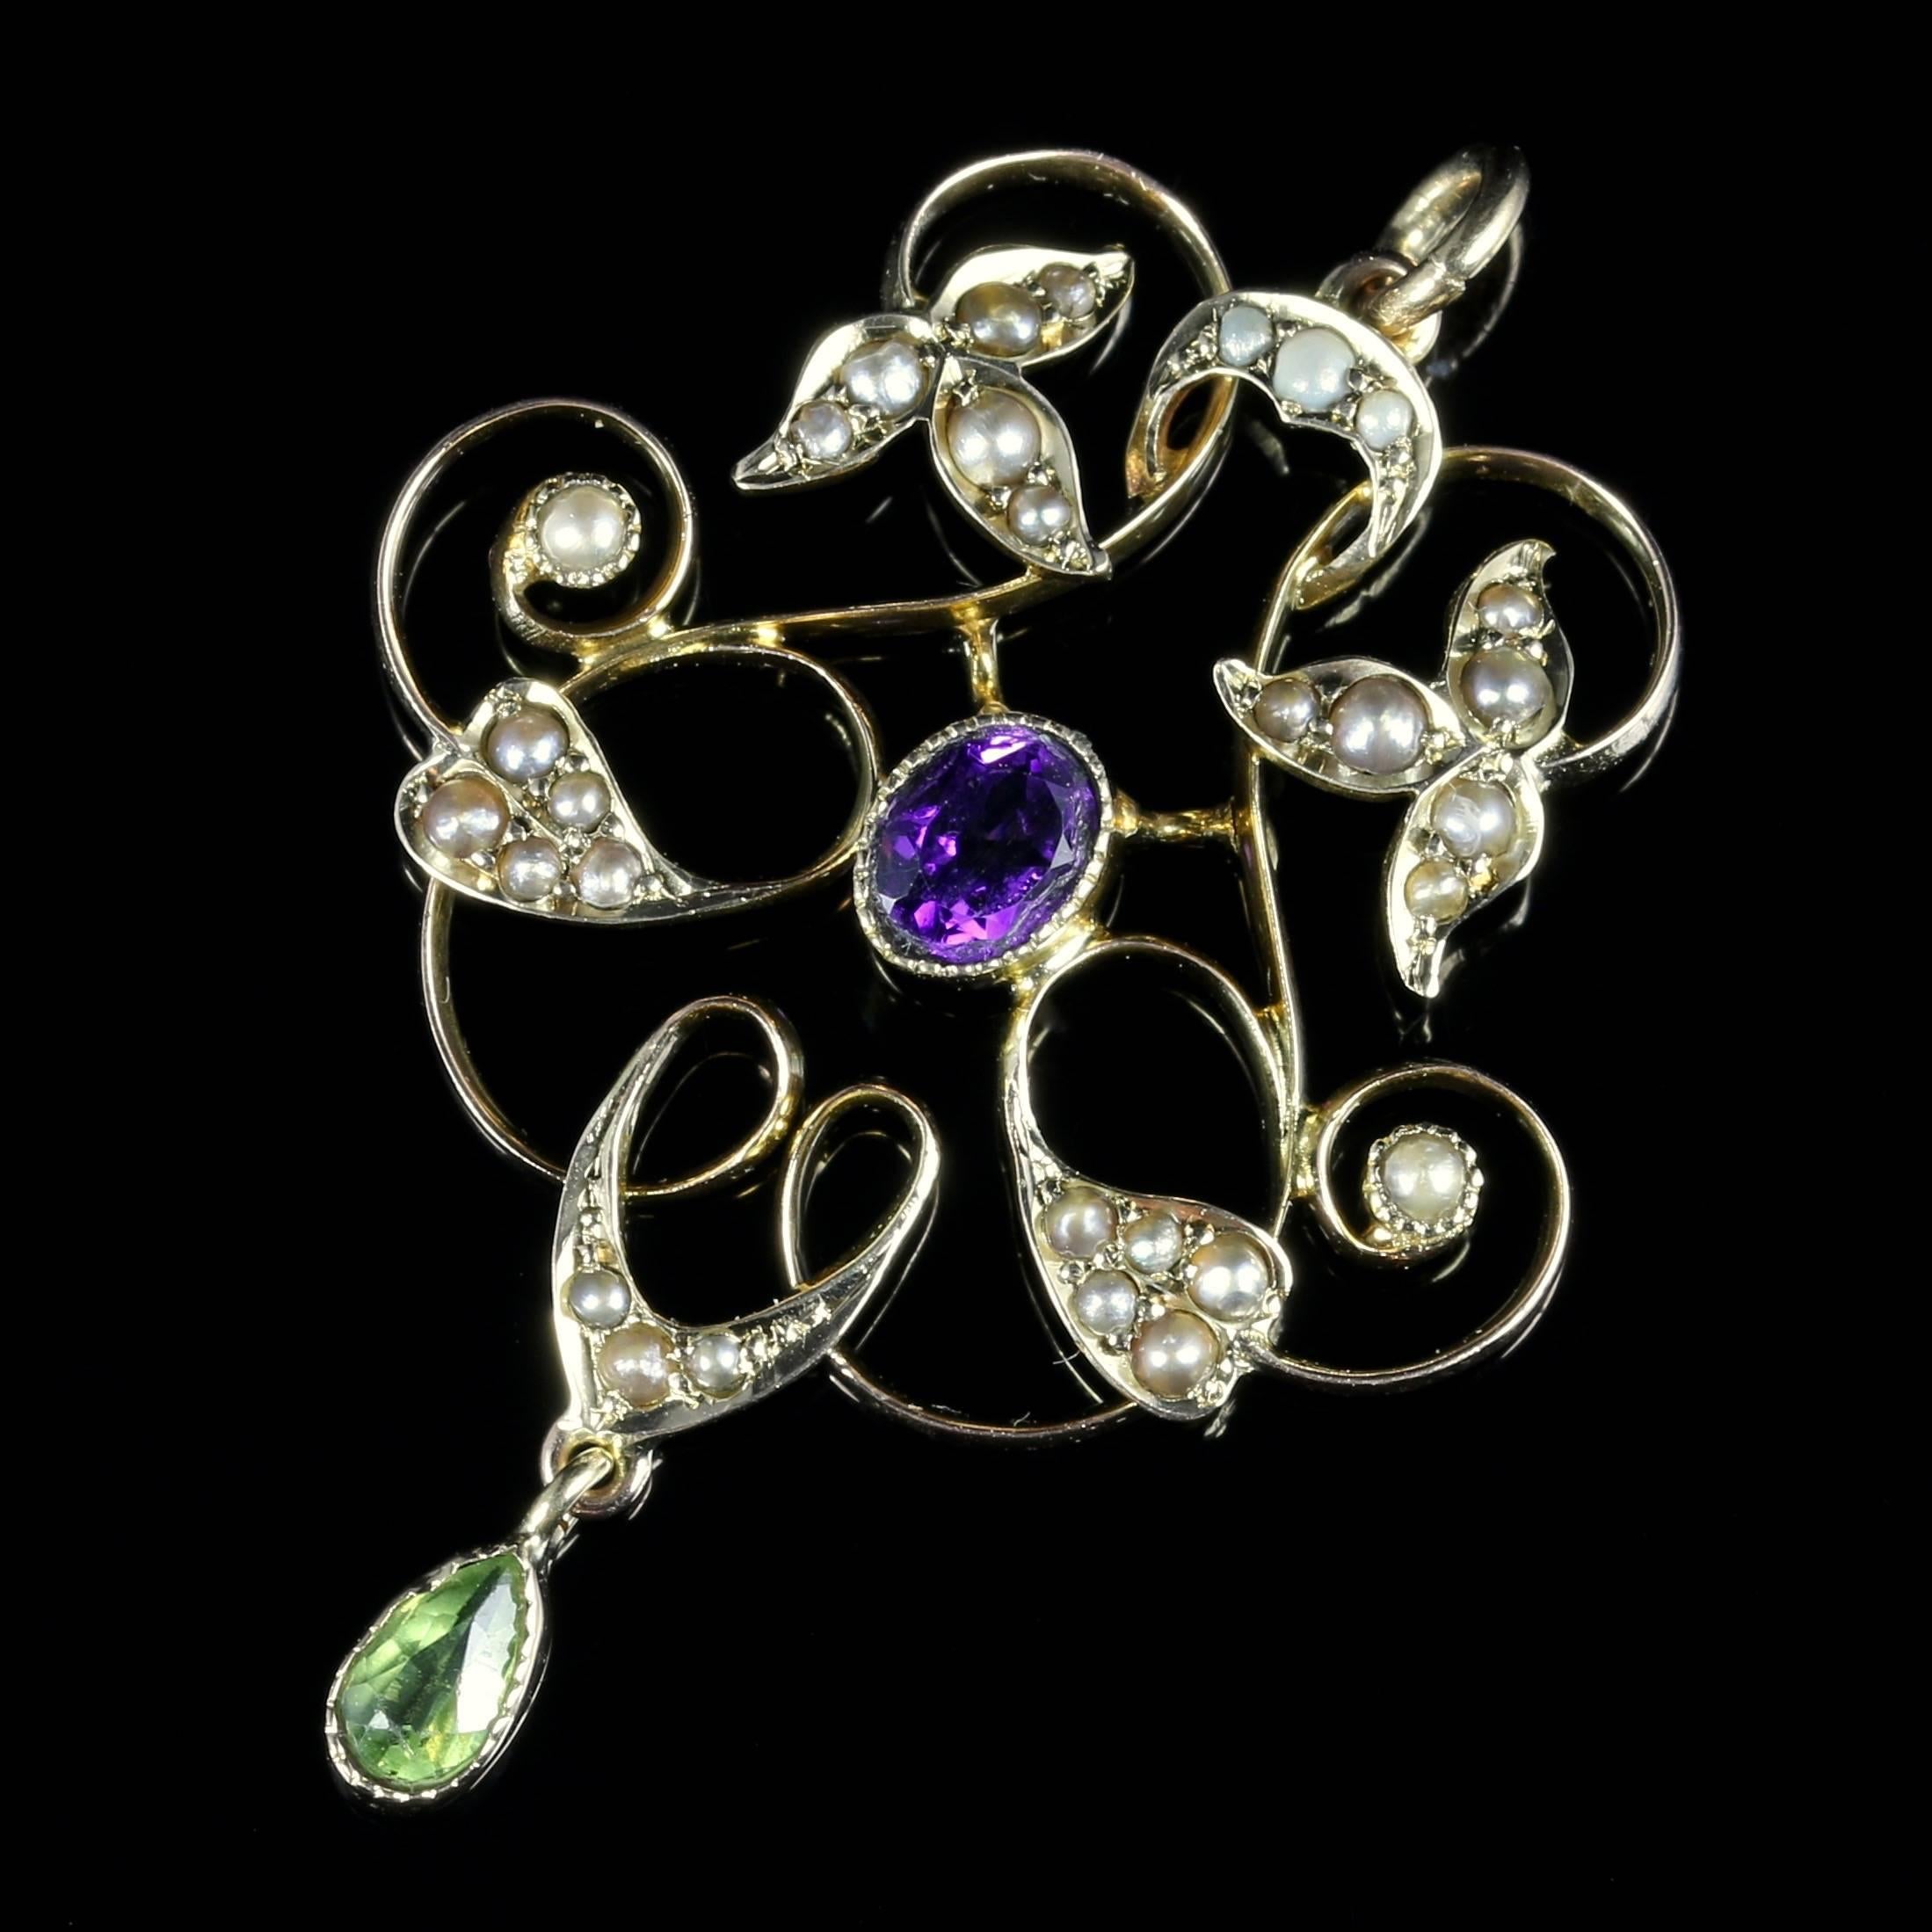 For more details please click continue reading down below...

This fabulous Suffragette Pendant is Circa 1900, set in 9ct Yellow Gold and set with a beautiful central Amethyst, Peridot dropper and adorned with Pearls all around.

All original